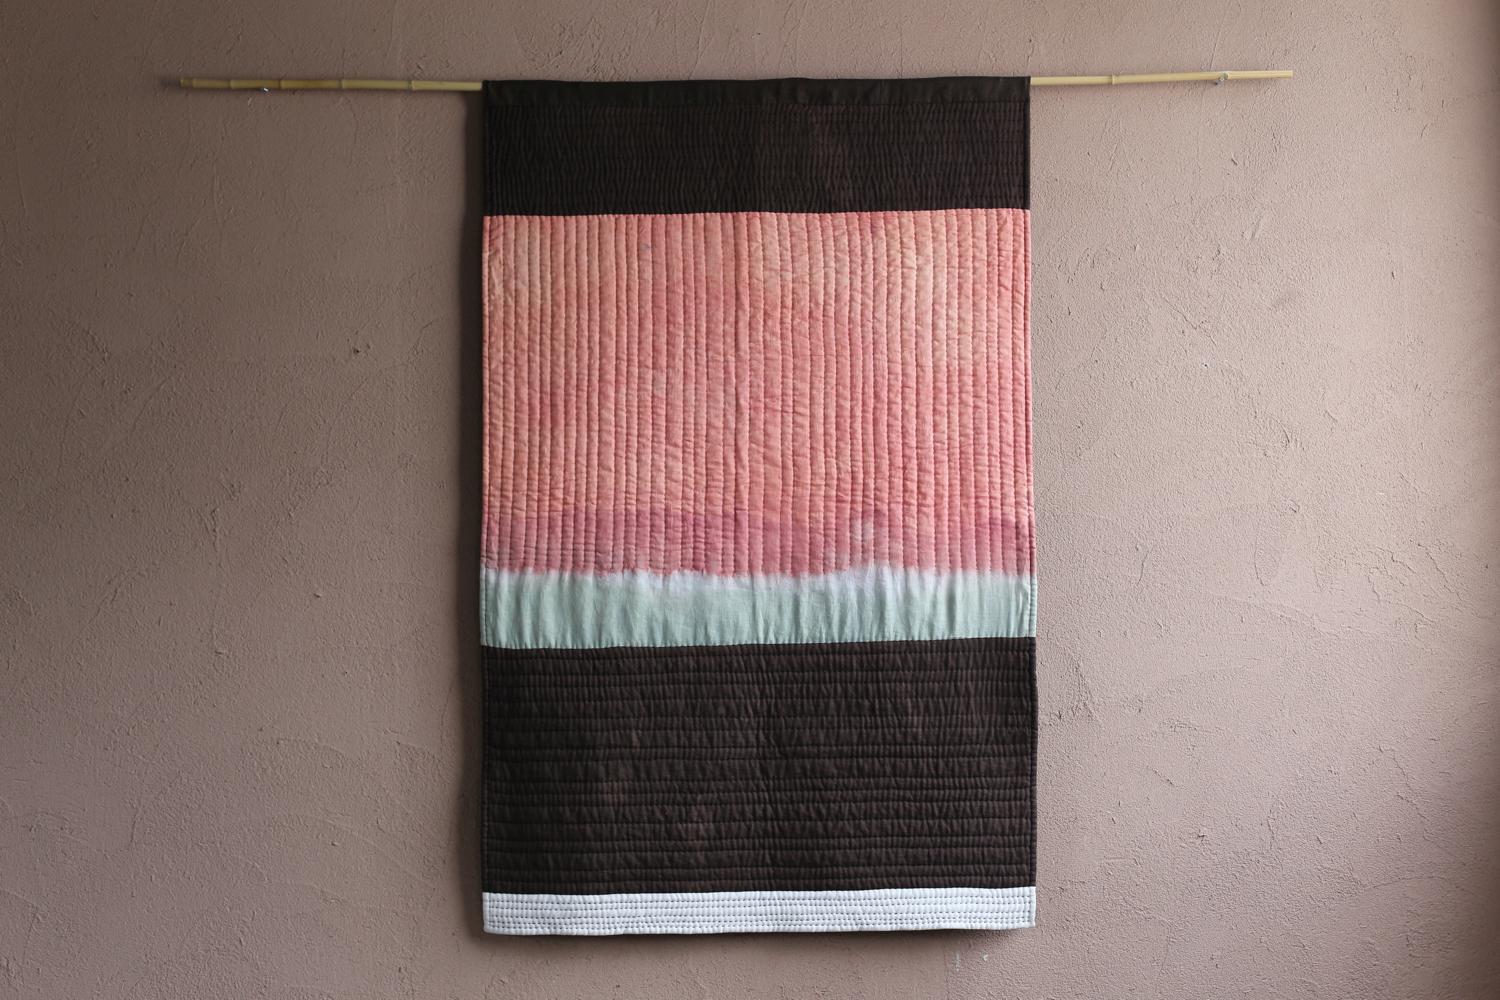 Title : hommage ?
Japan / 2022s
Size : W 1000 H 1500 mm

A tribute to the respected potter, Lucie Rie.
This quilt is made with french linen.
Hand quilted with Japanese sashiko thread.
Hand dyed with madder, logwood, green leaf, and tingi (A